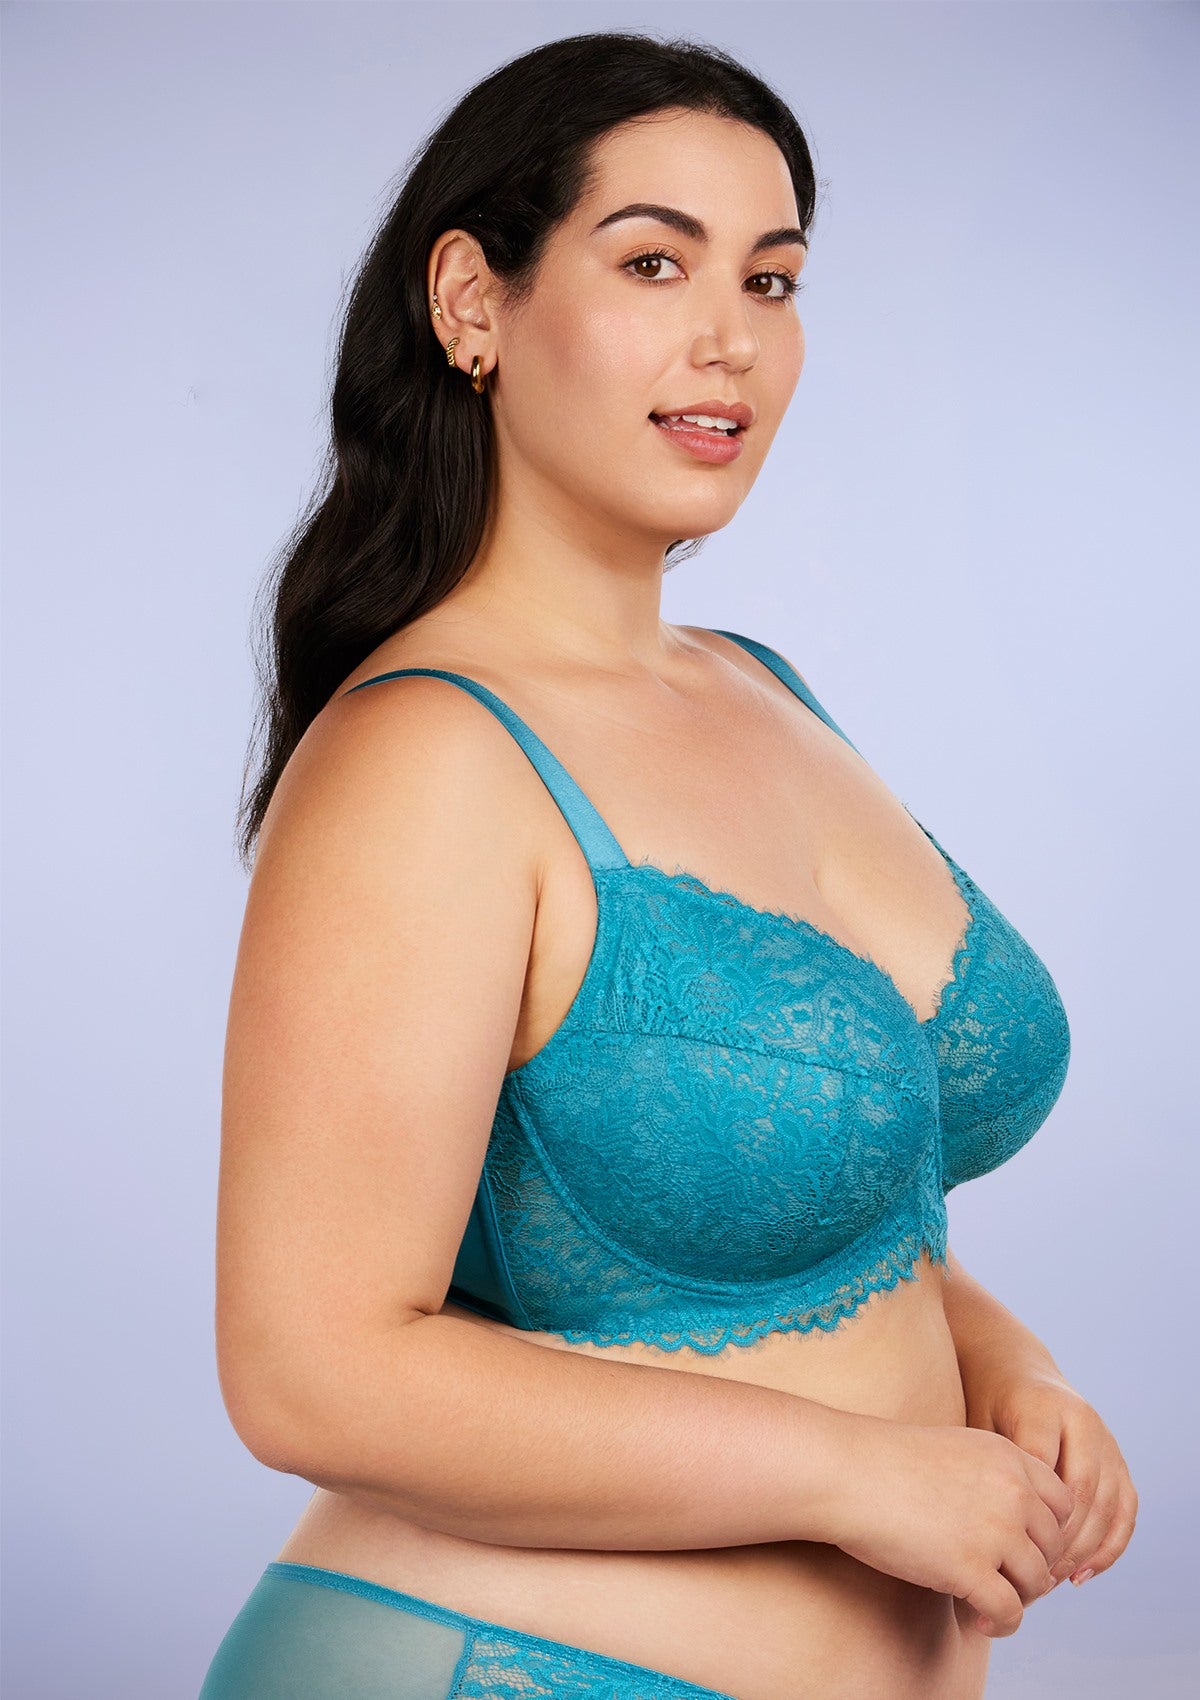 HSIA Sunflower Unlined Lace Bra: Best Bra For Wide Set Breasts - Horizon Blue / 34 / G